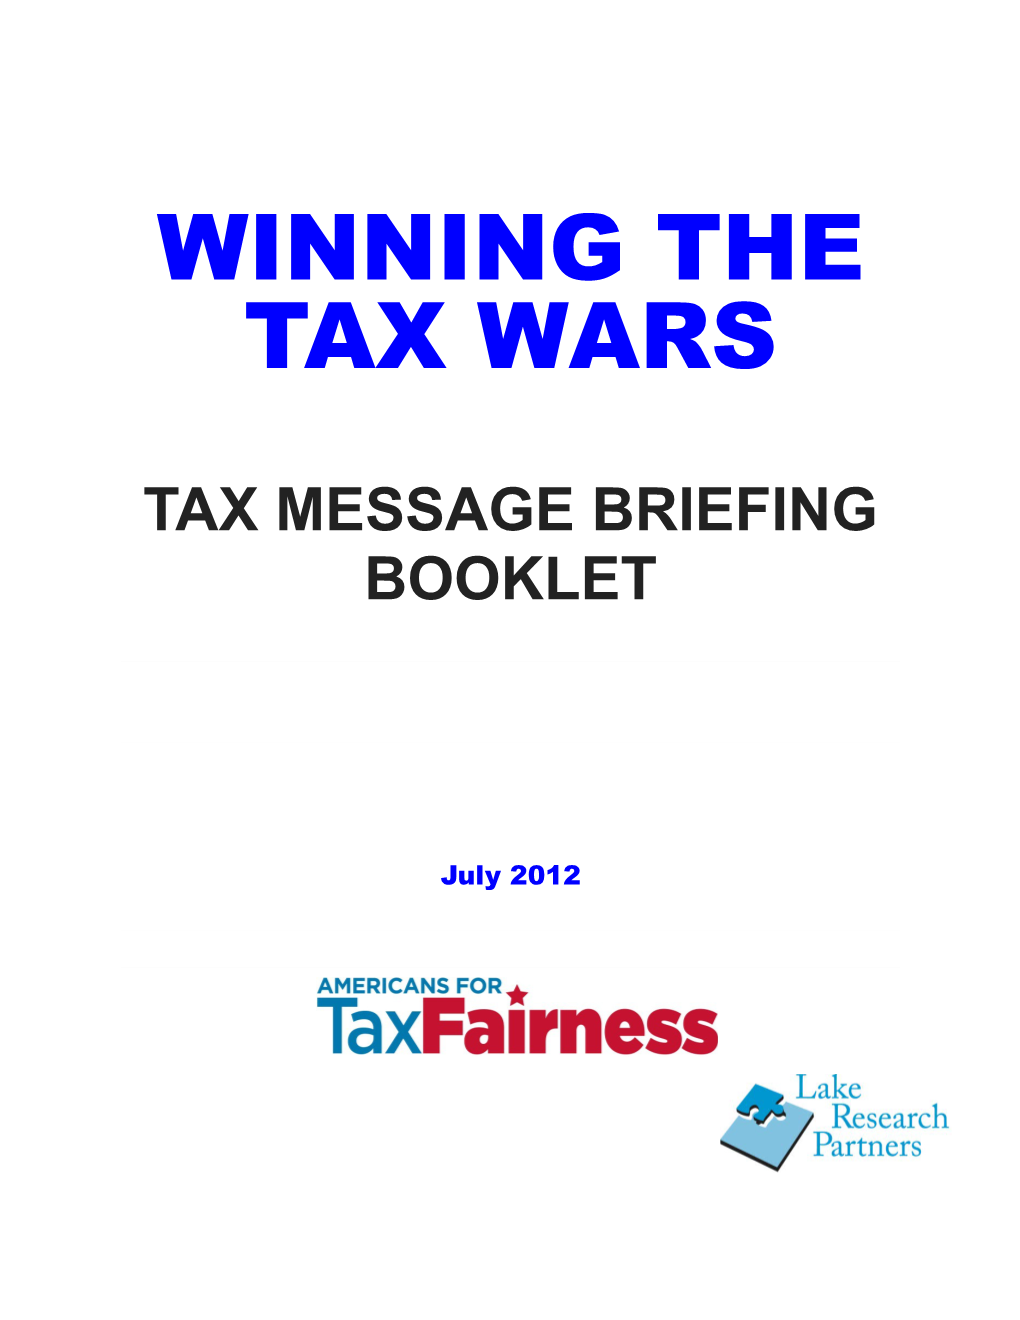 Tax Message Briefing Booklet